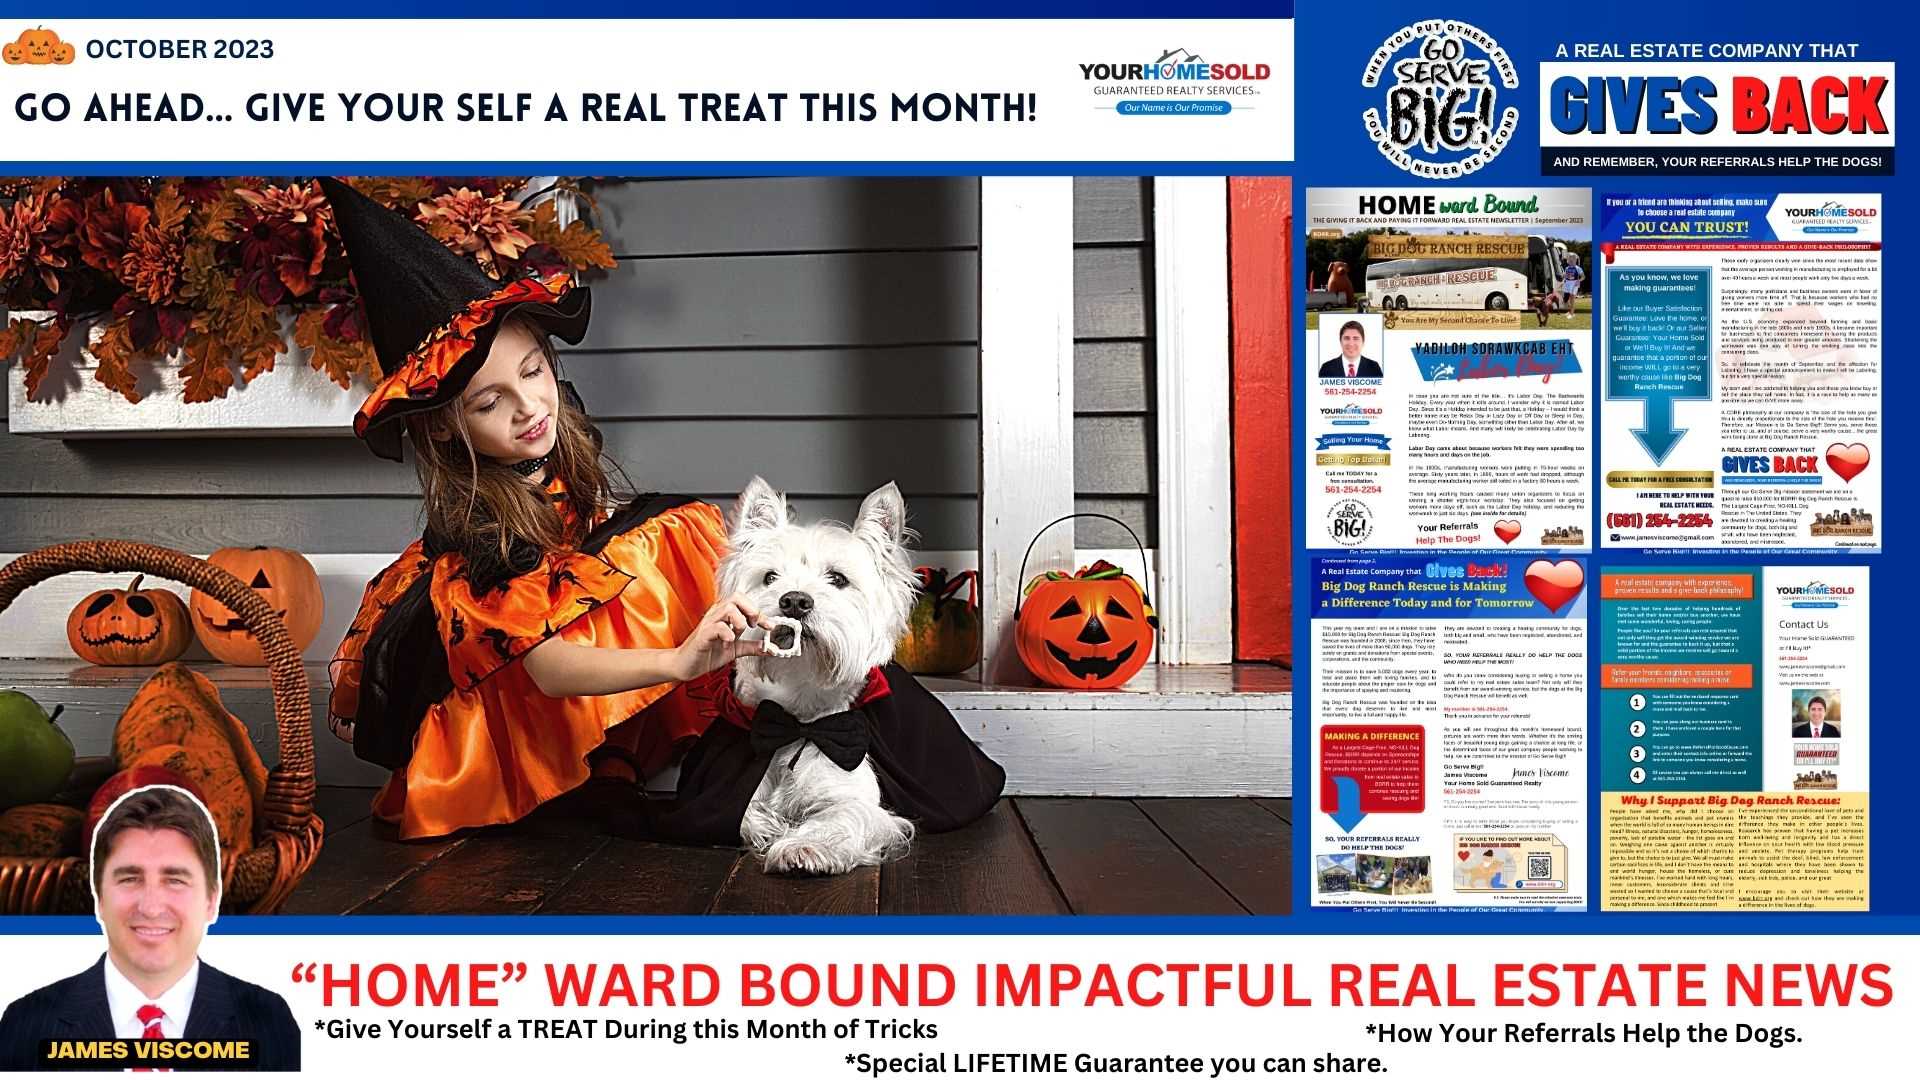 Give Yourself a Real Treat This Month! October 2023 Homeward Bound Newsletter